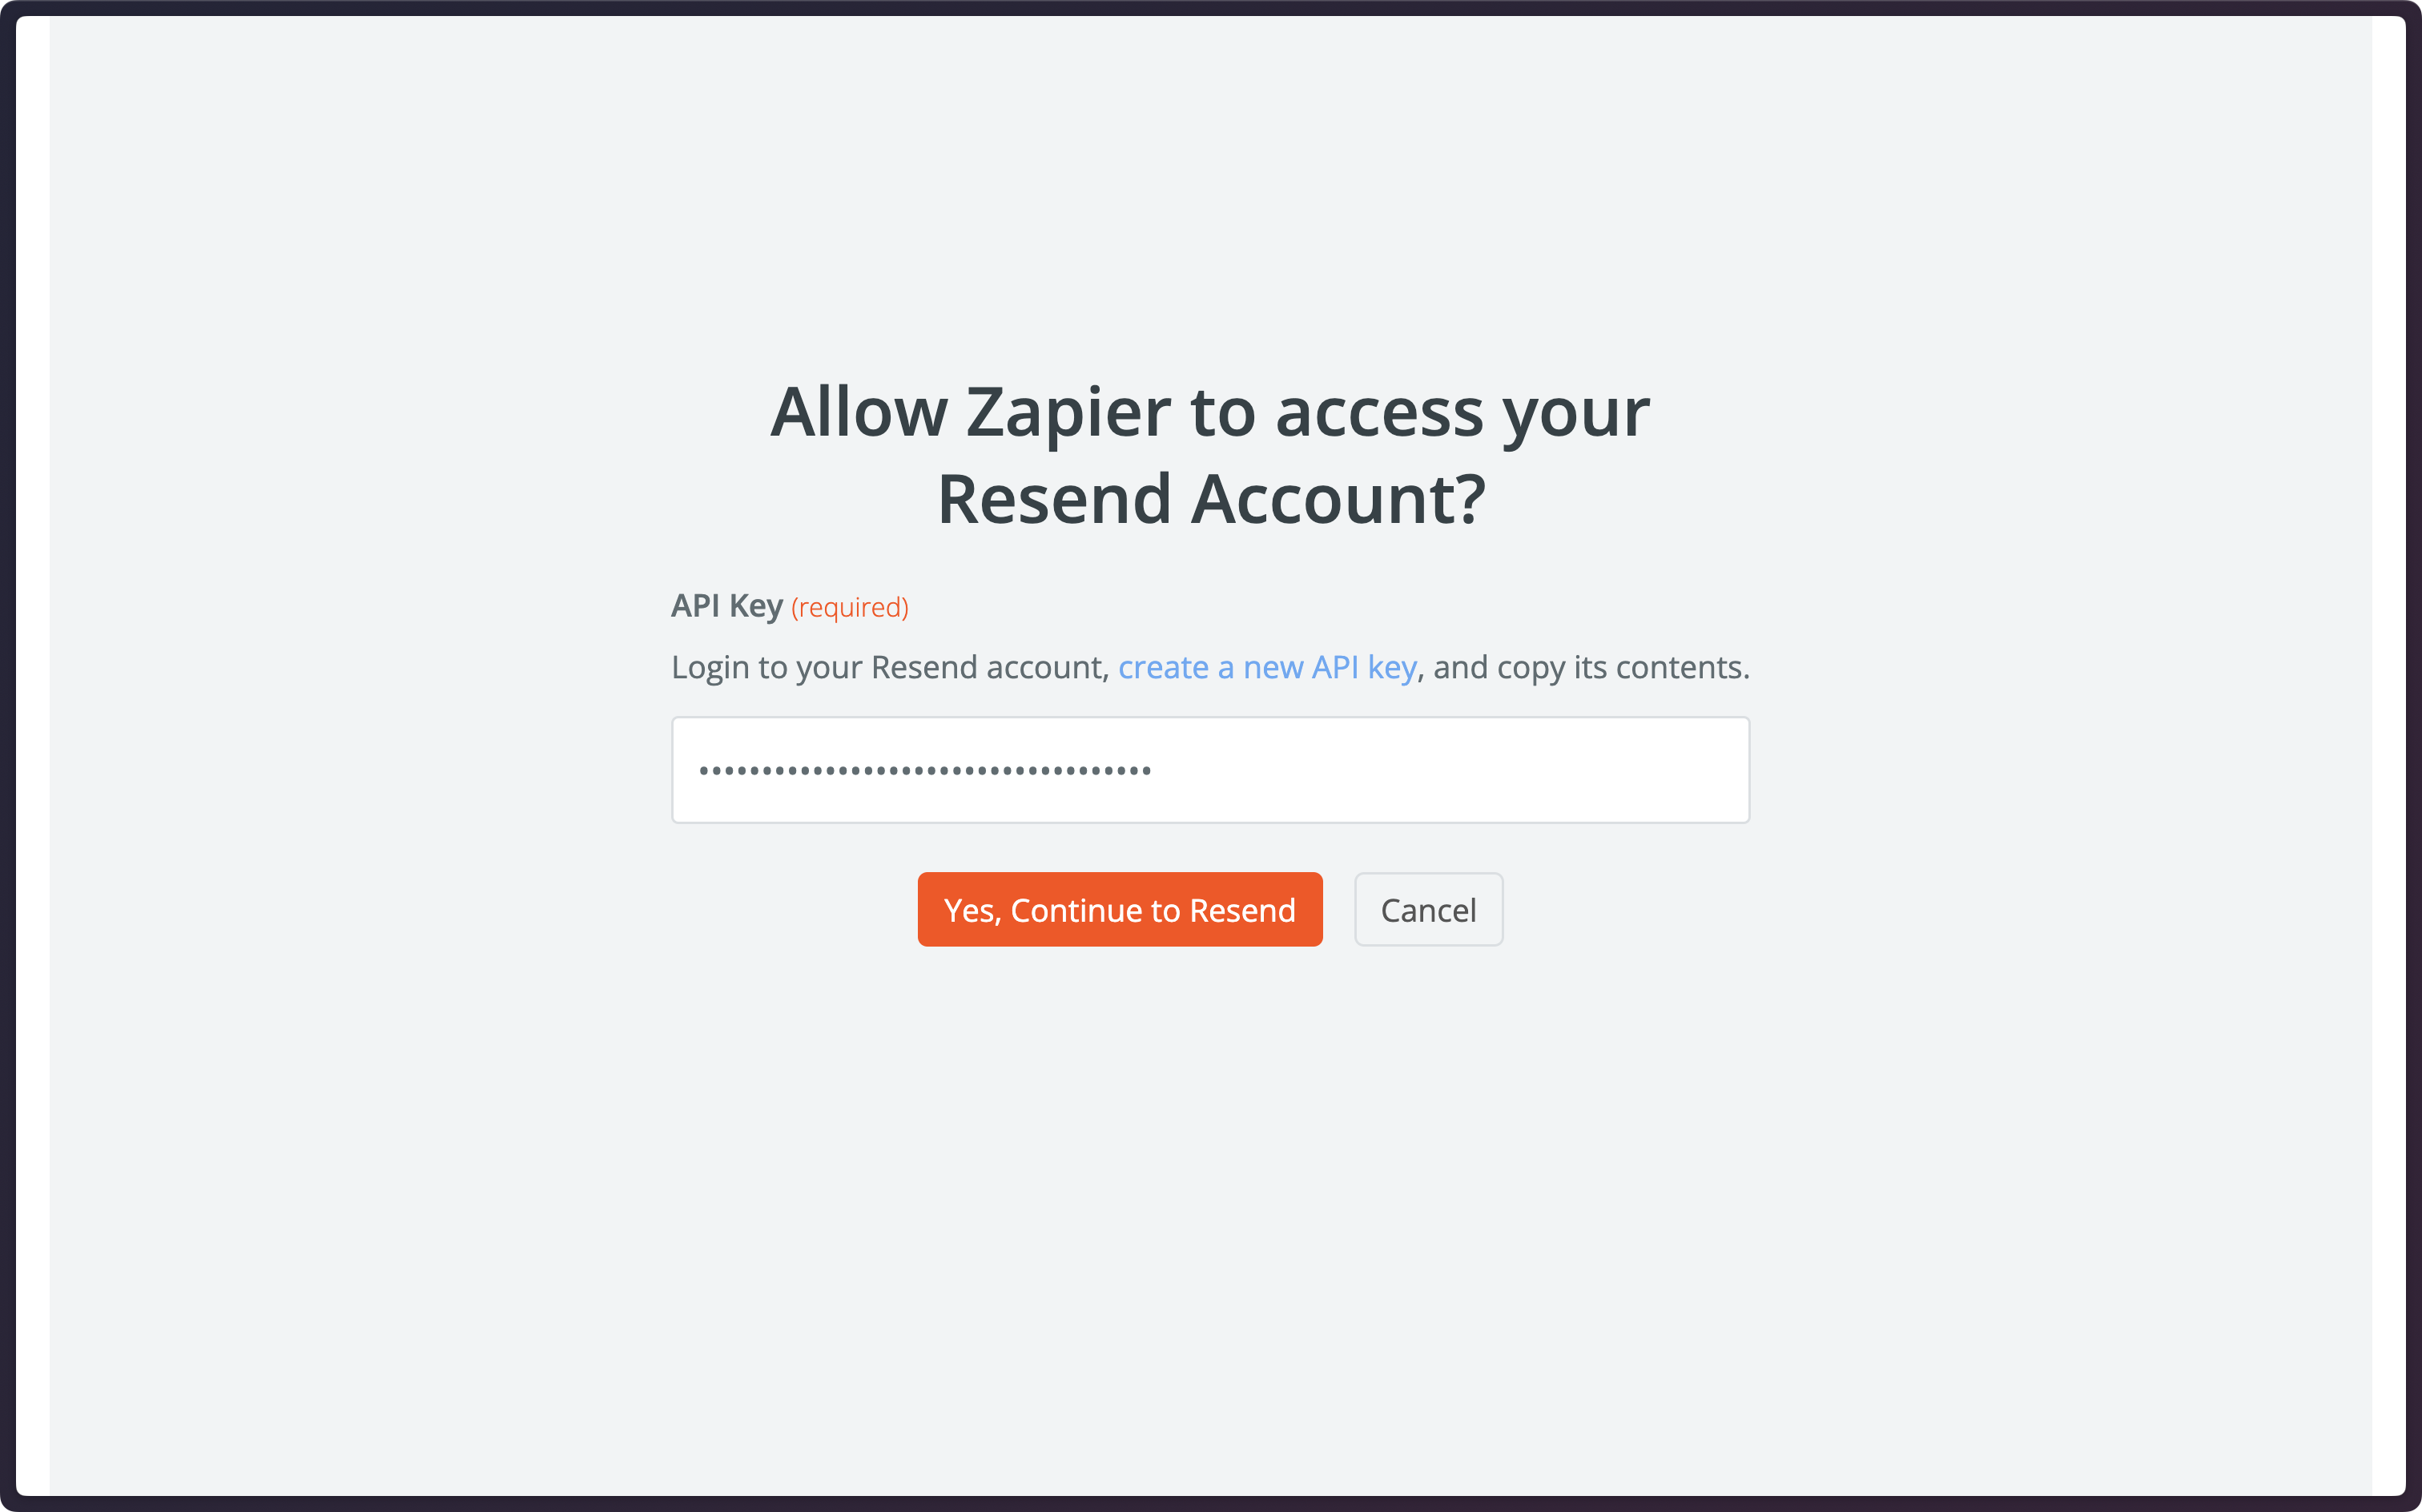 Allowing Zapier to connect to Resend via API Key